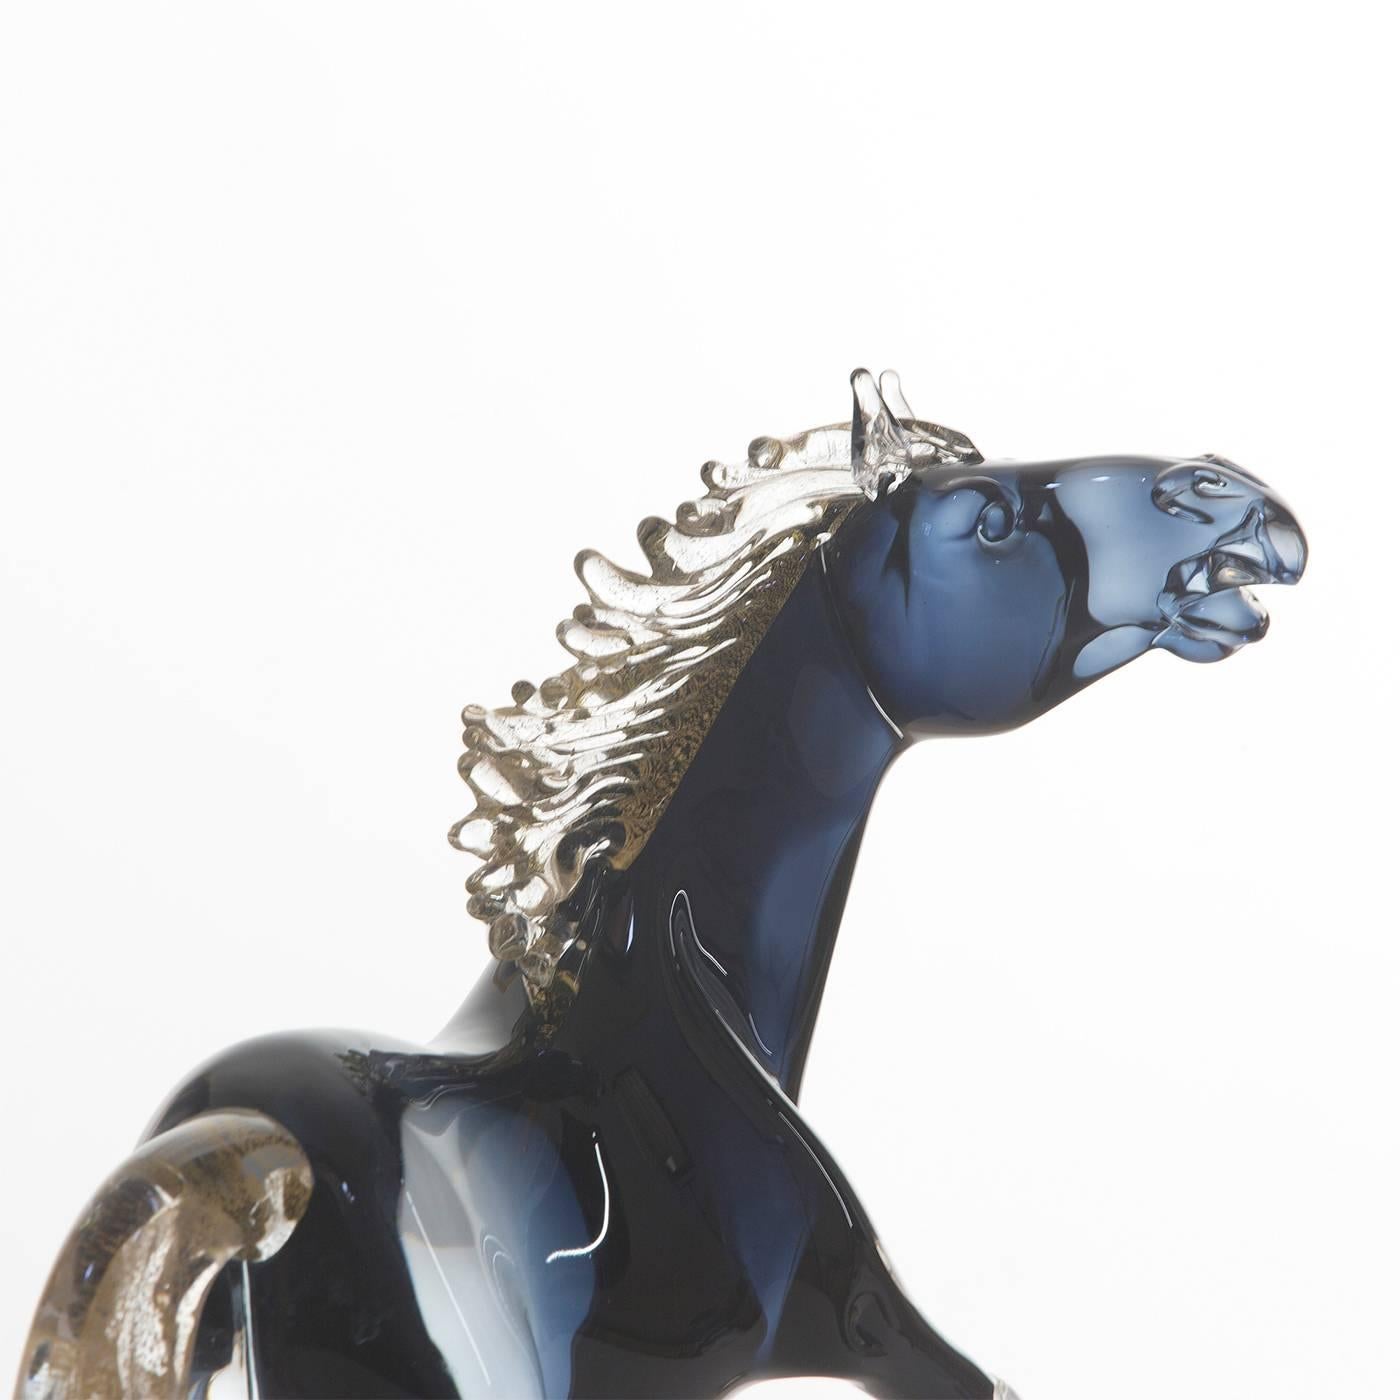 This exceptionally animated small sitting horse is entirely handmade by the master glass blower Zanetti on the island of Murano in Venice. The mane, tail and hooves have 24-karat gold details, while the shaded black glass of the body features subtle